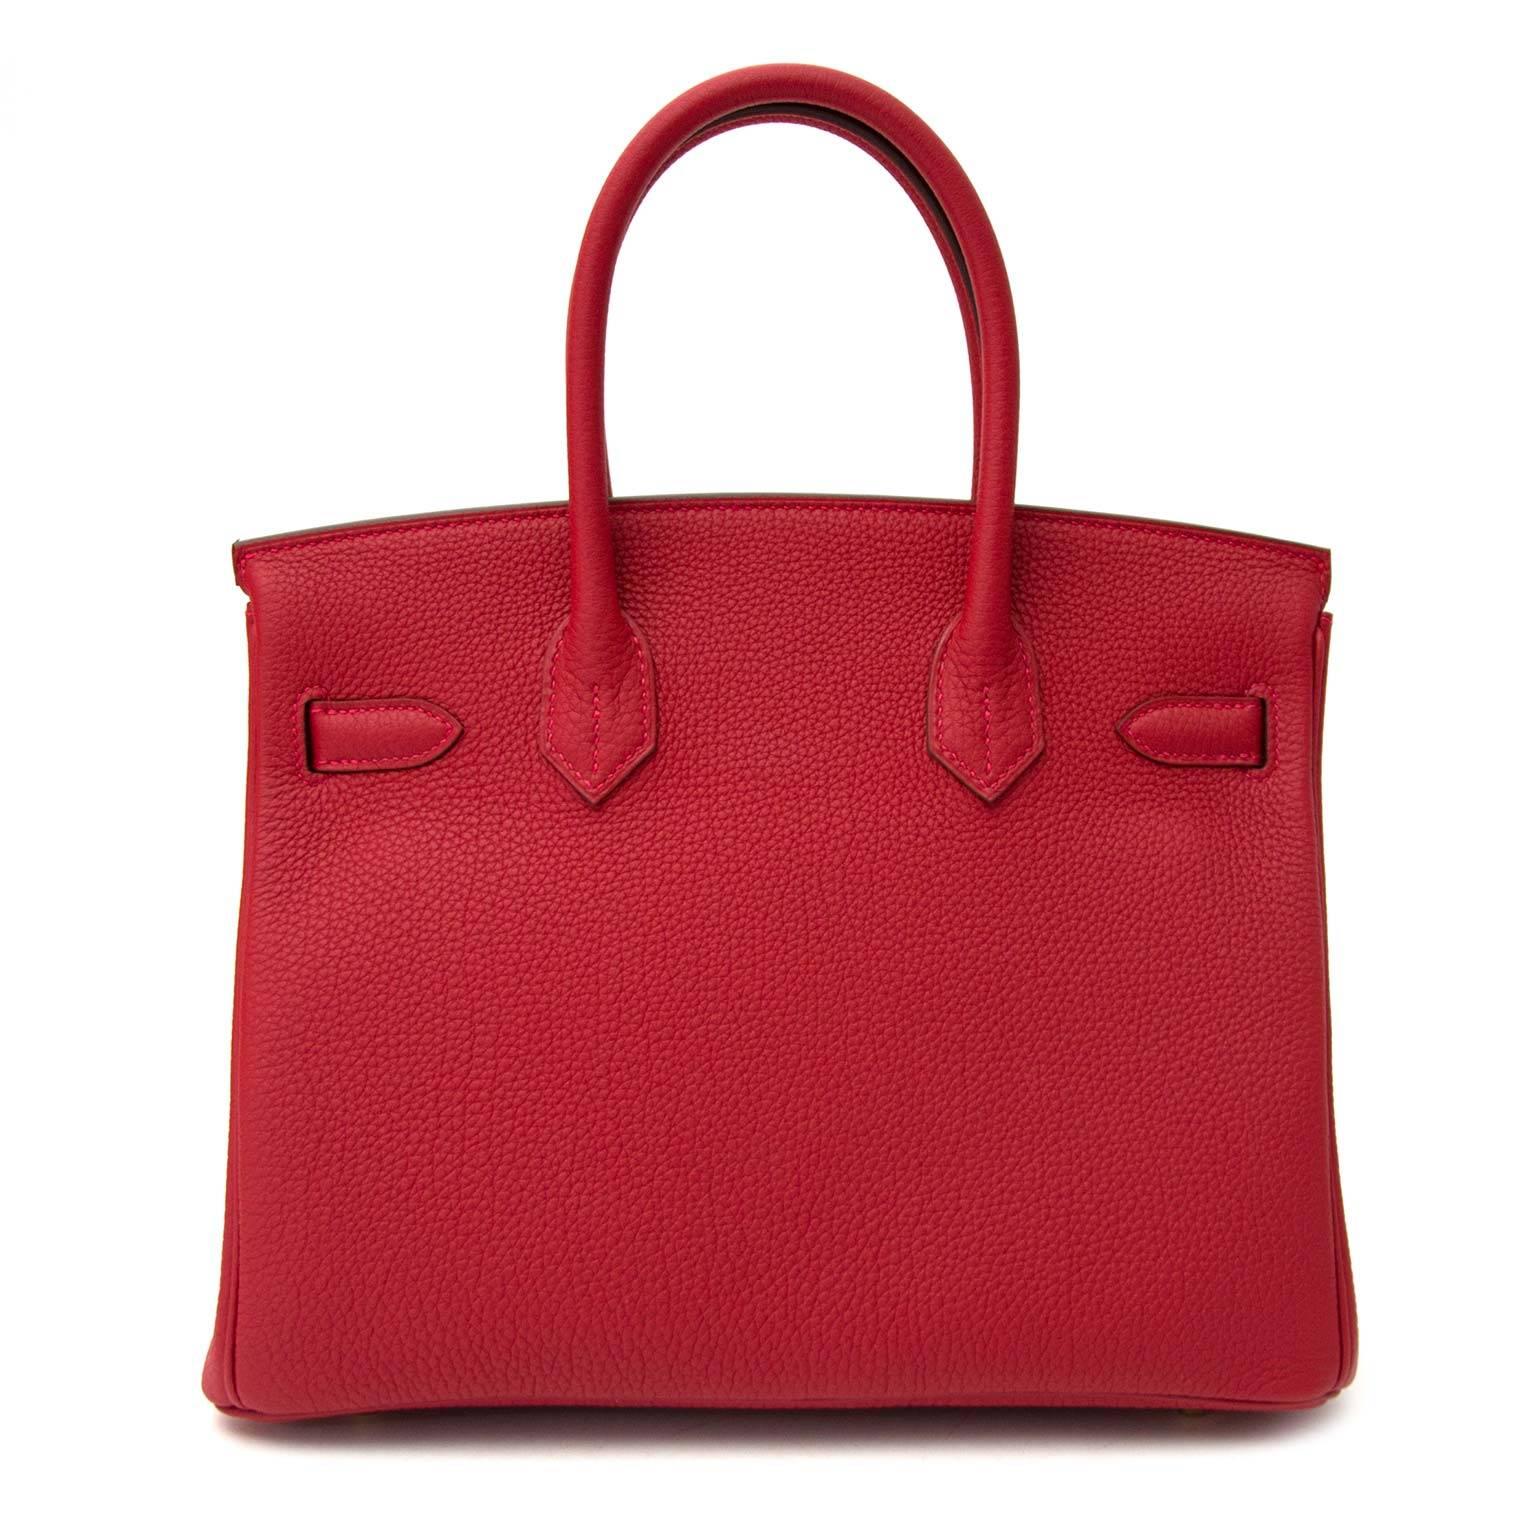 Never Used

Hermès Birkin 30 Togo Rouge Vif GHW

Skip the waitinglist and get this beauty right now! This Hermès Birkin comes in a deep red togo leather named 'Rouge Vif'.

Togo leather is known for its grainy but smooth texture. It's almost 100 %